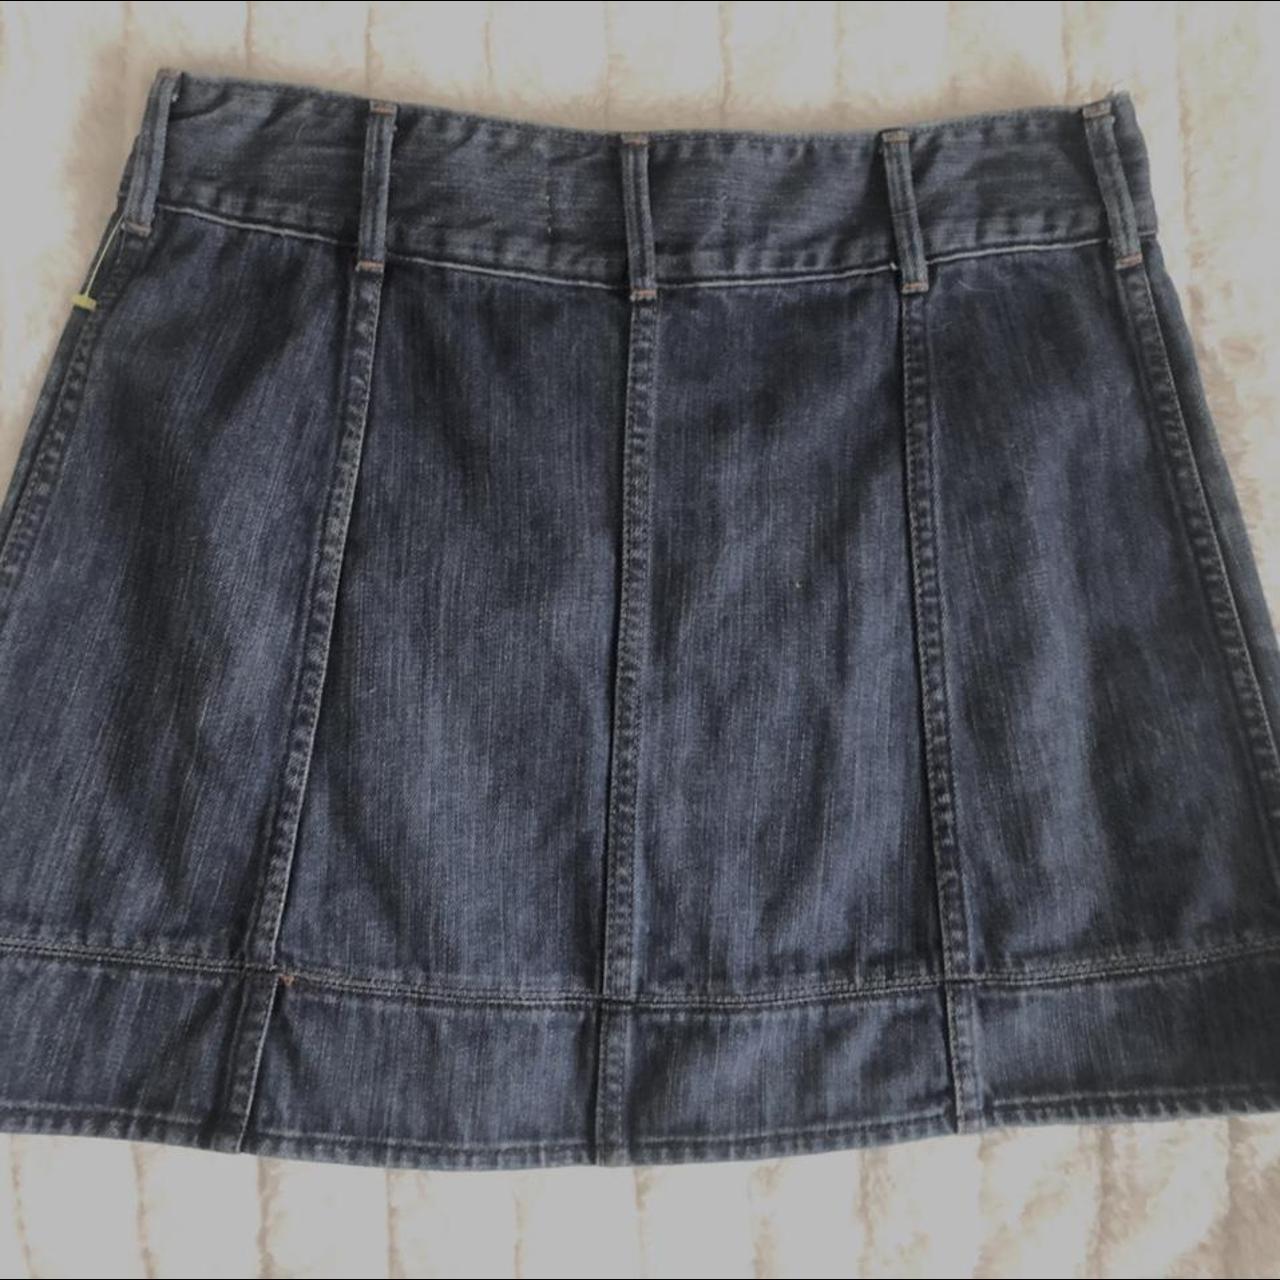 Abercrombie & Fitch Women's Navy and Blue Skirt (2)